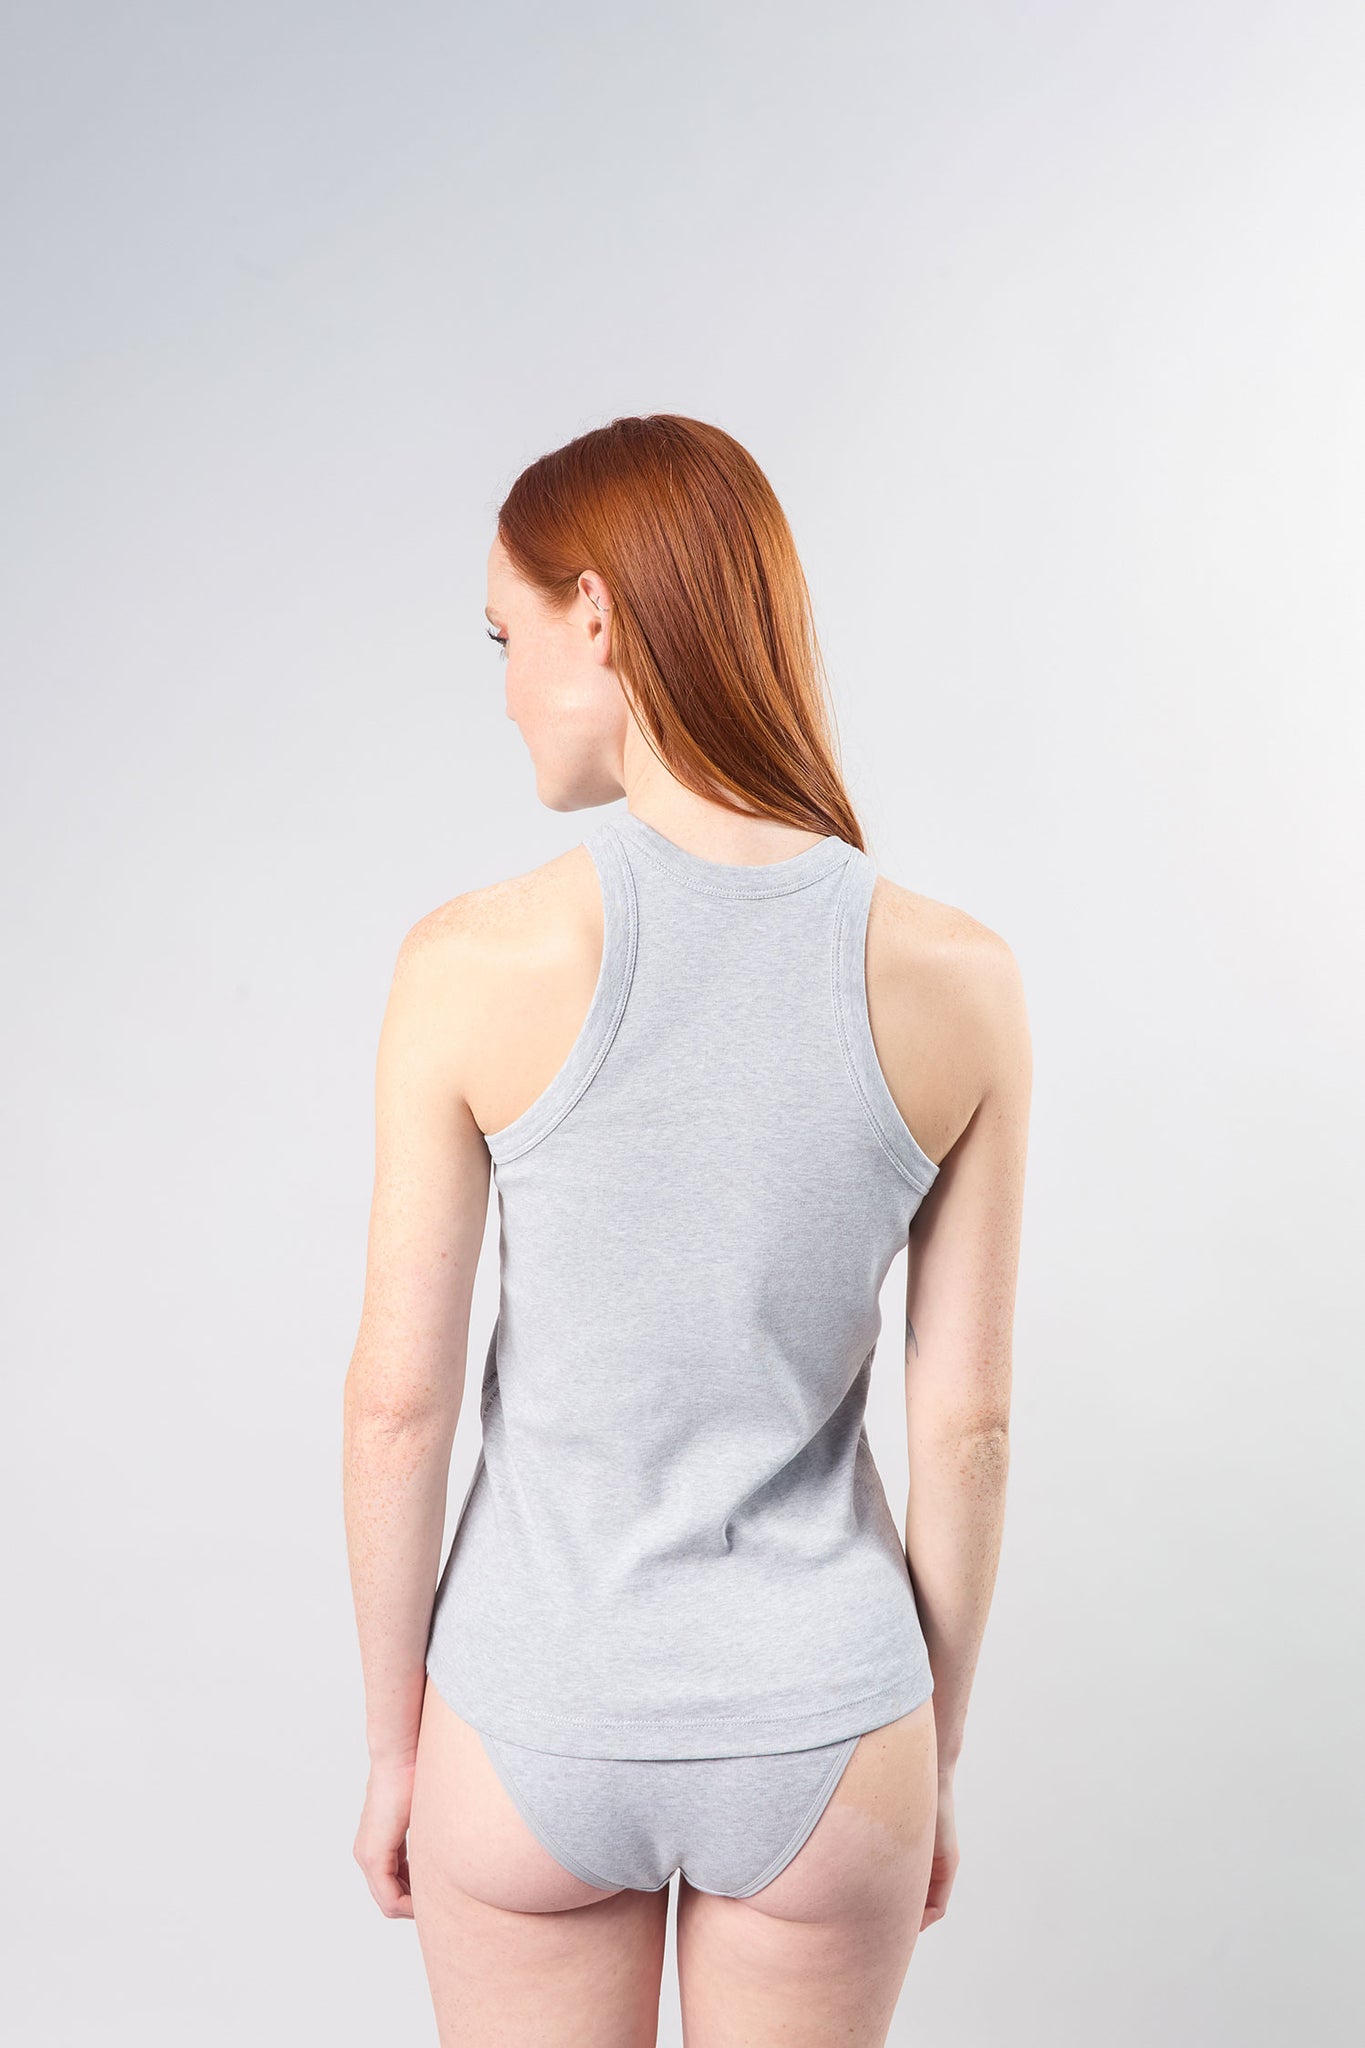 woman wearing 90s tank facing back and showing the cutout shape on the back armhole